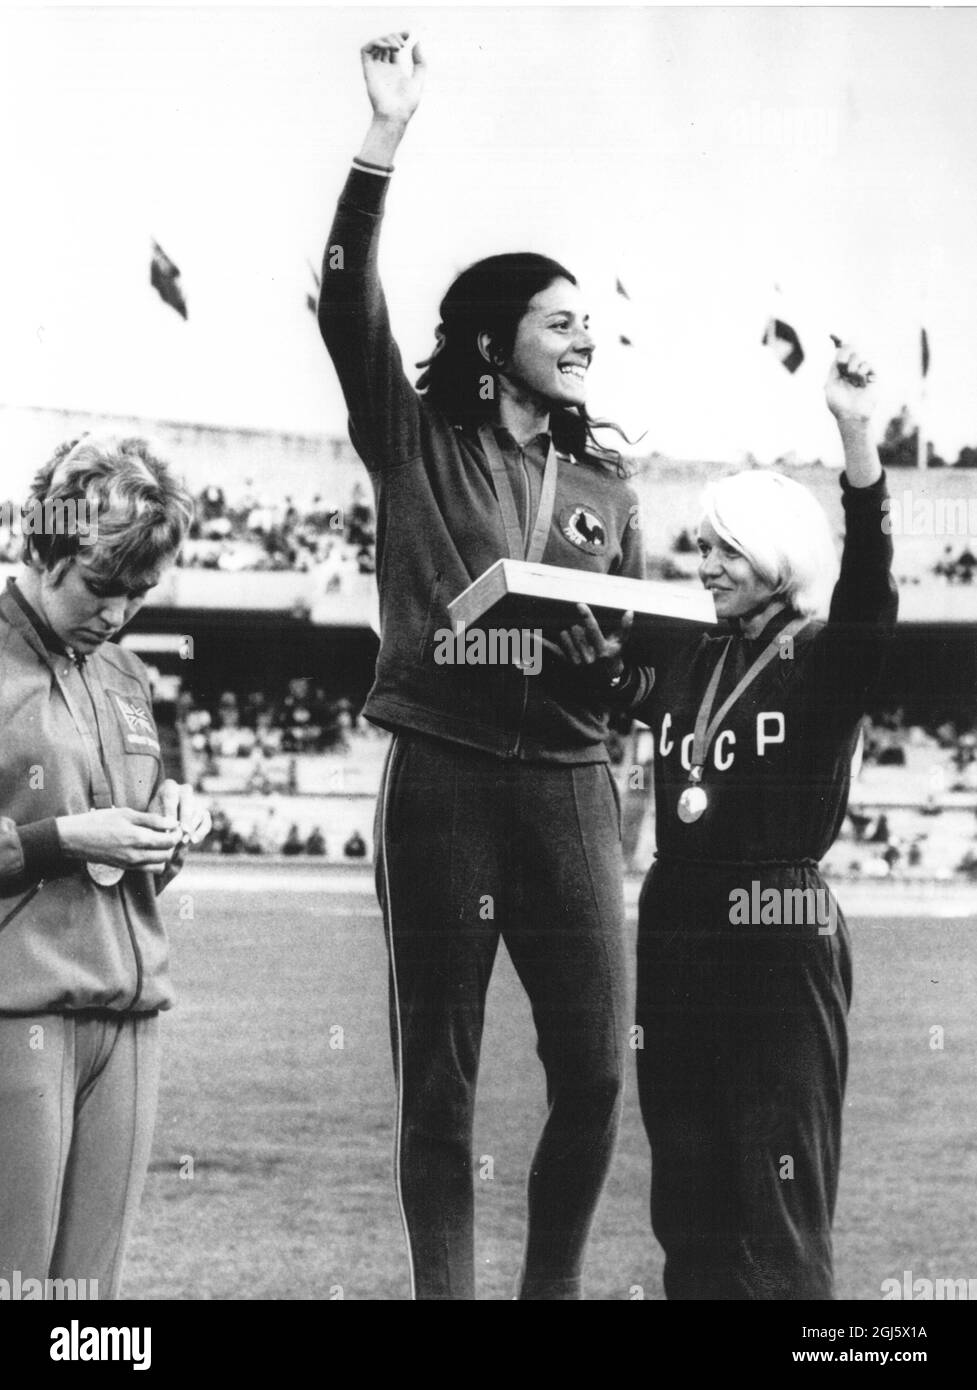 As Britain 's Lilian Board ( left ) stands unsmilingly by , France 's Colette Besson ( centre ) waves to the crowds after receiving her gold medal for winning the final of the Women ' s 400 metres at the 19th Olympic Games . Her time of 52.0 seconds equalled the Olympic record . Miss Board was second and Russia ' s Natalia Pechenkina ( Right ) gained the bronze medal . 17 October 1968 Stock Photo